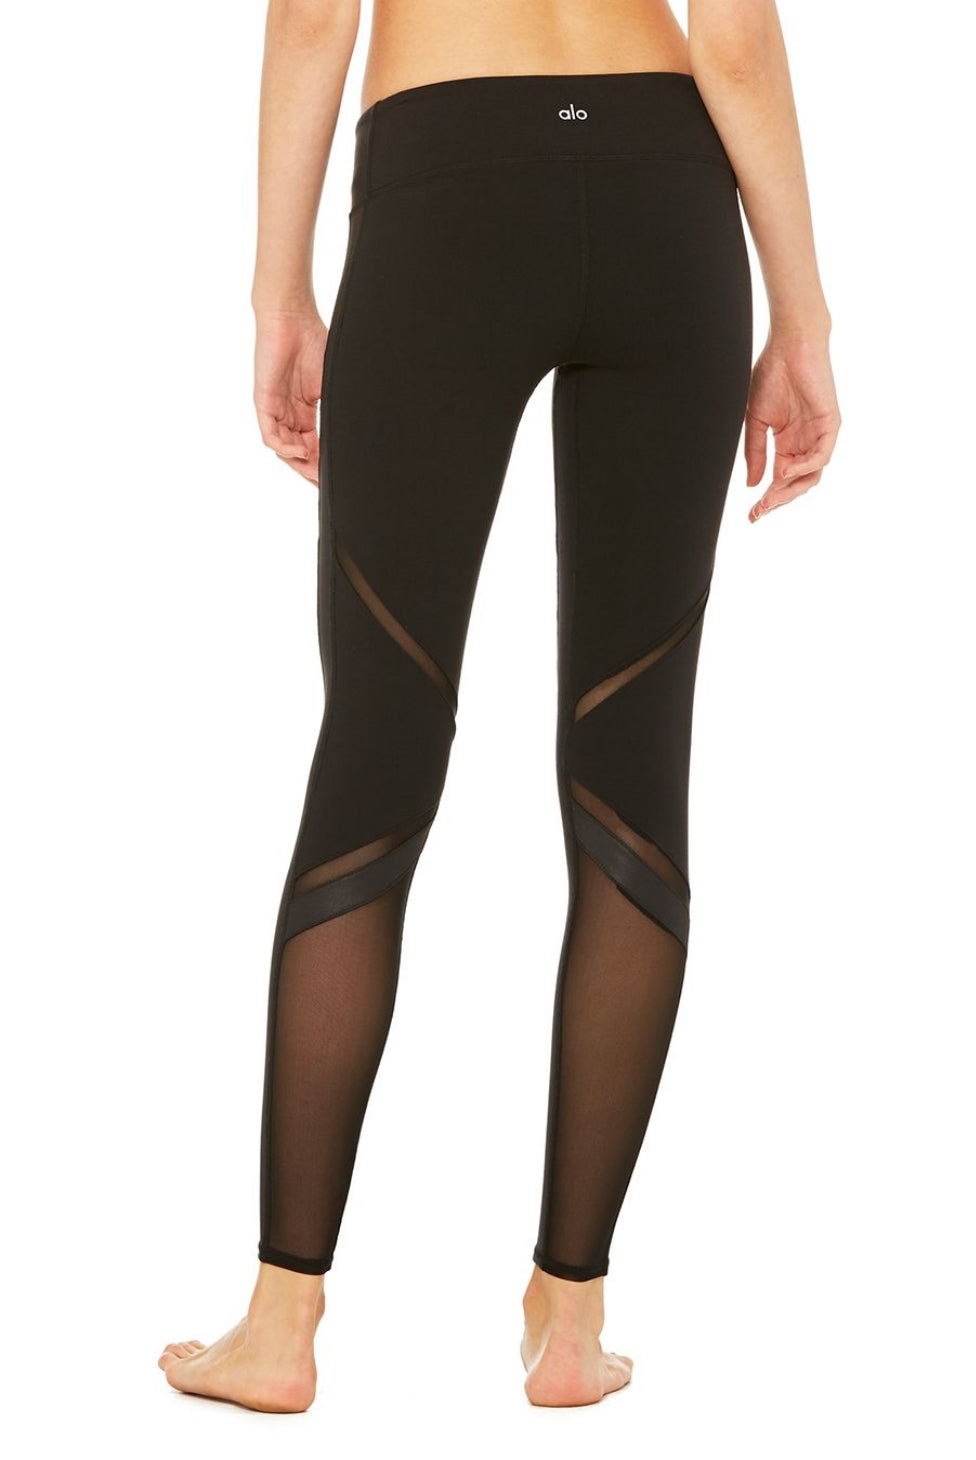 IN STORE ONLY - Epic Legging - Shop Yu Fashion